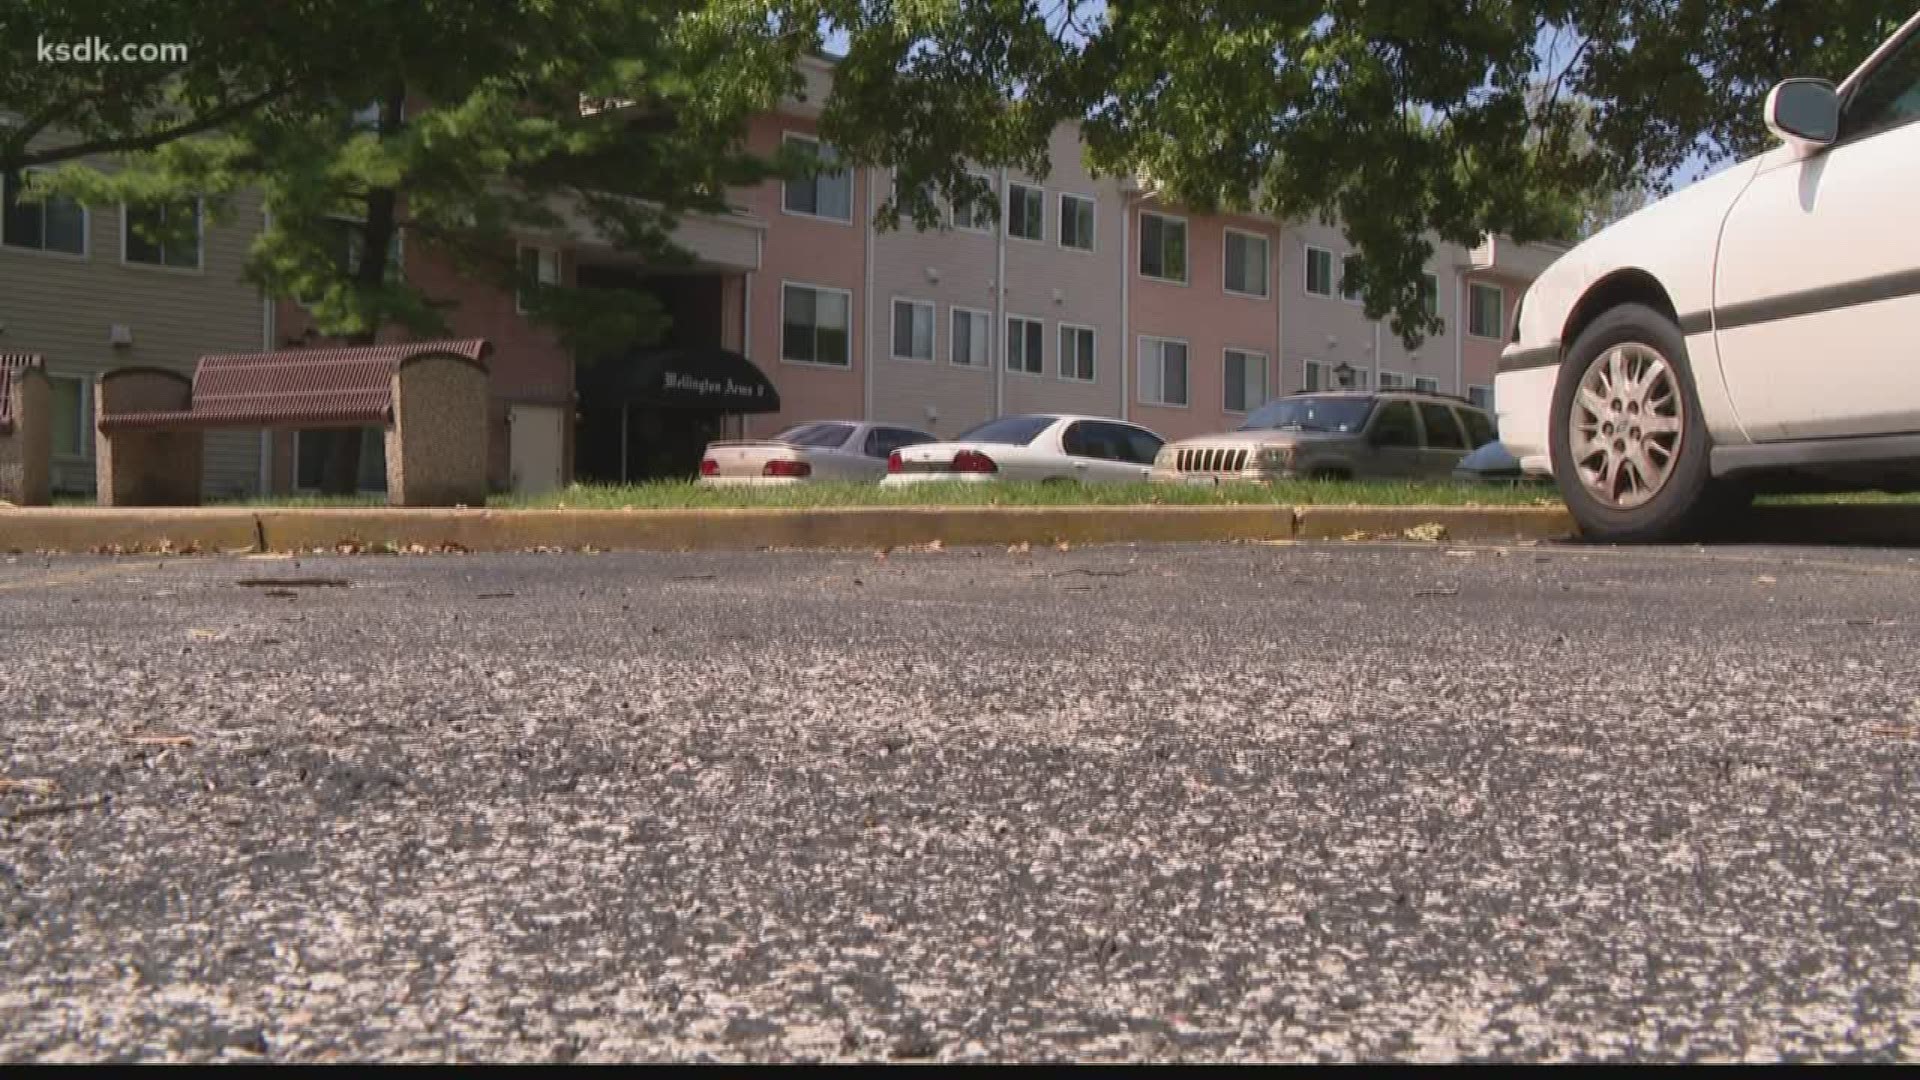 People at one senior living center are on alert after one of their neighbors was carjacked and assaulted overnight.